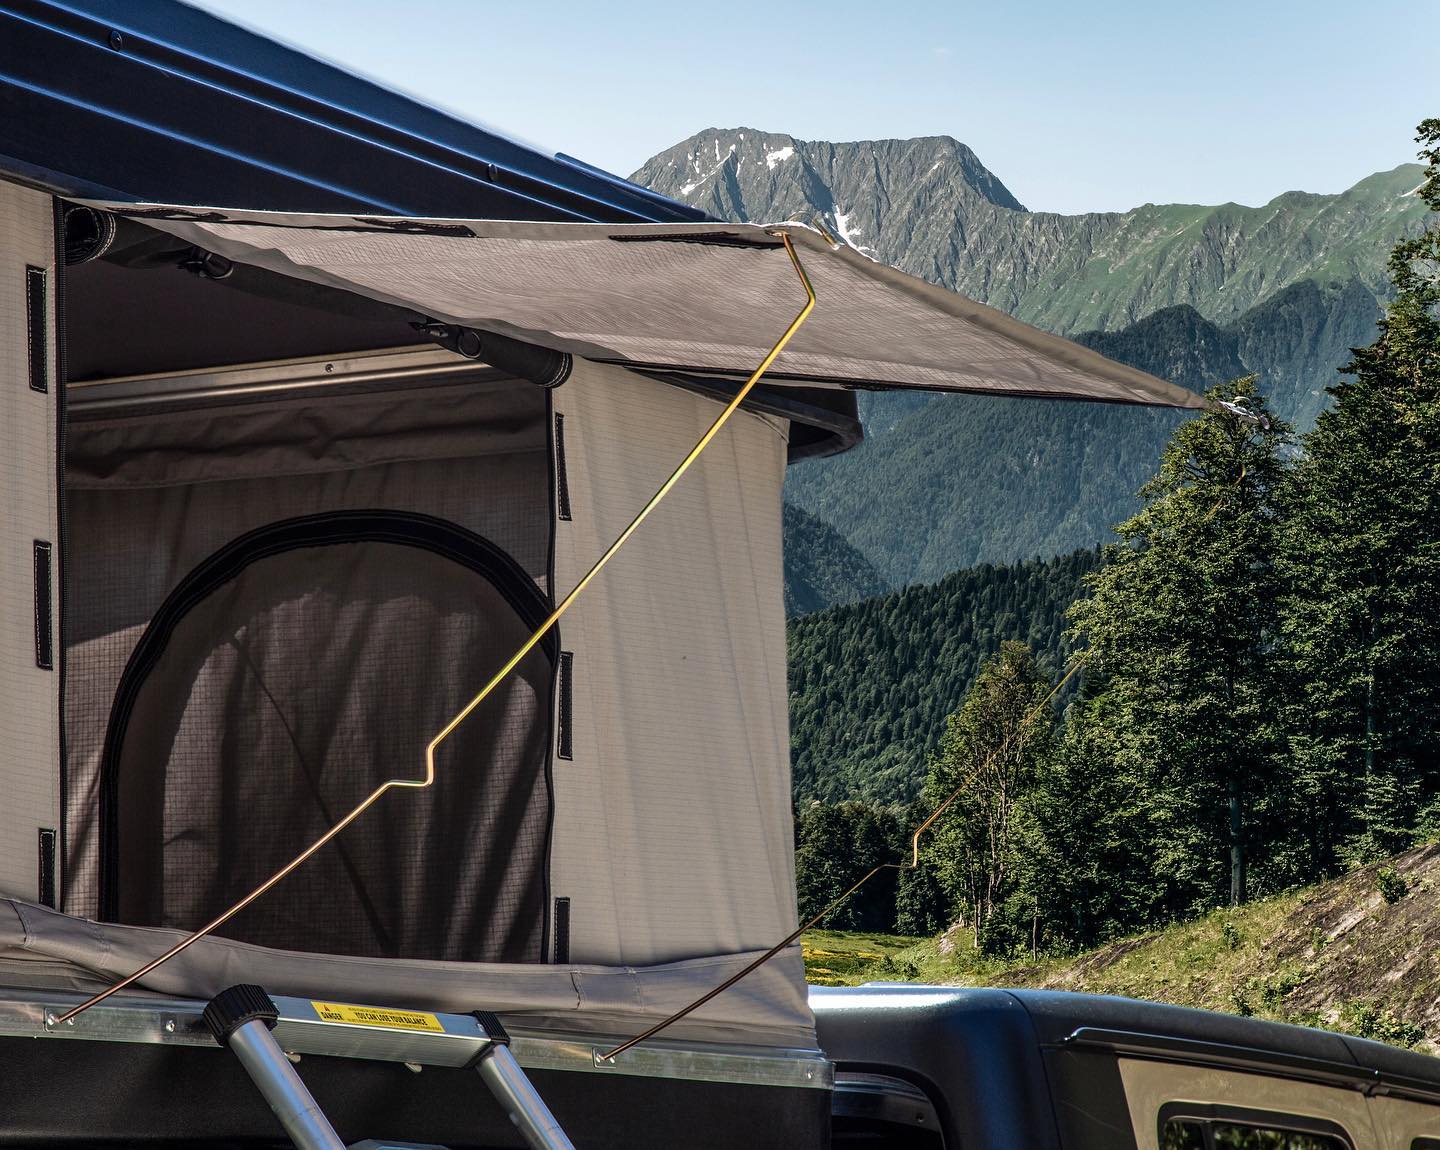 Precautions for buying a rooftop tent?